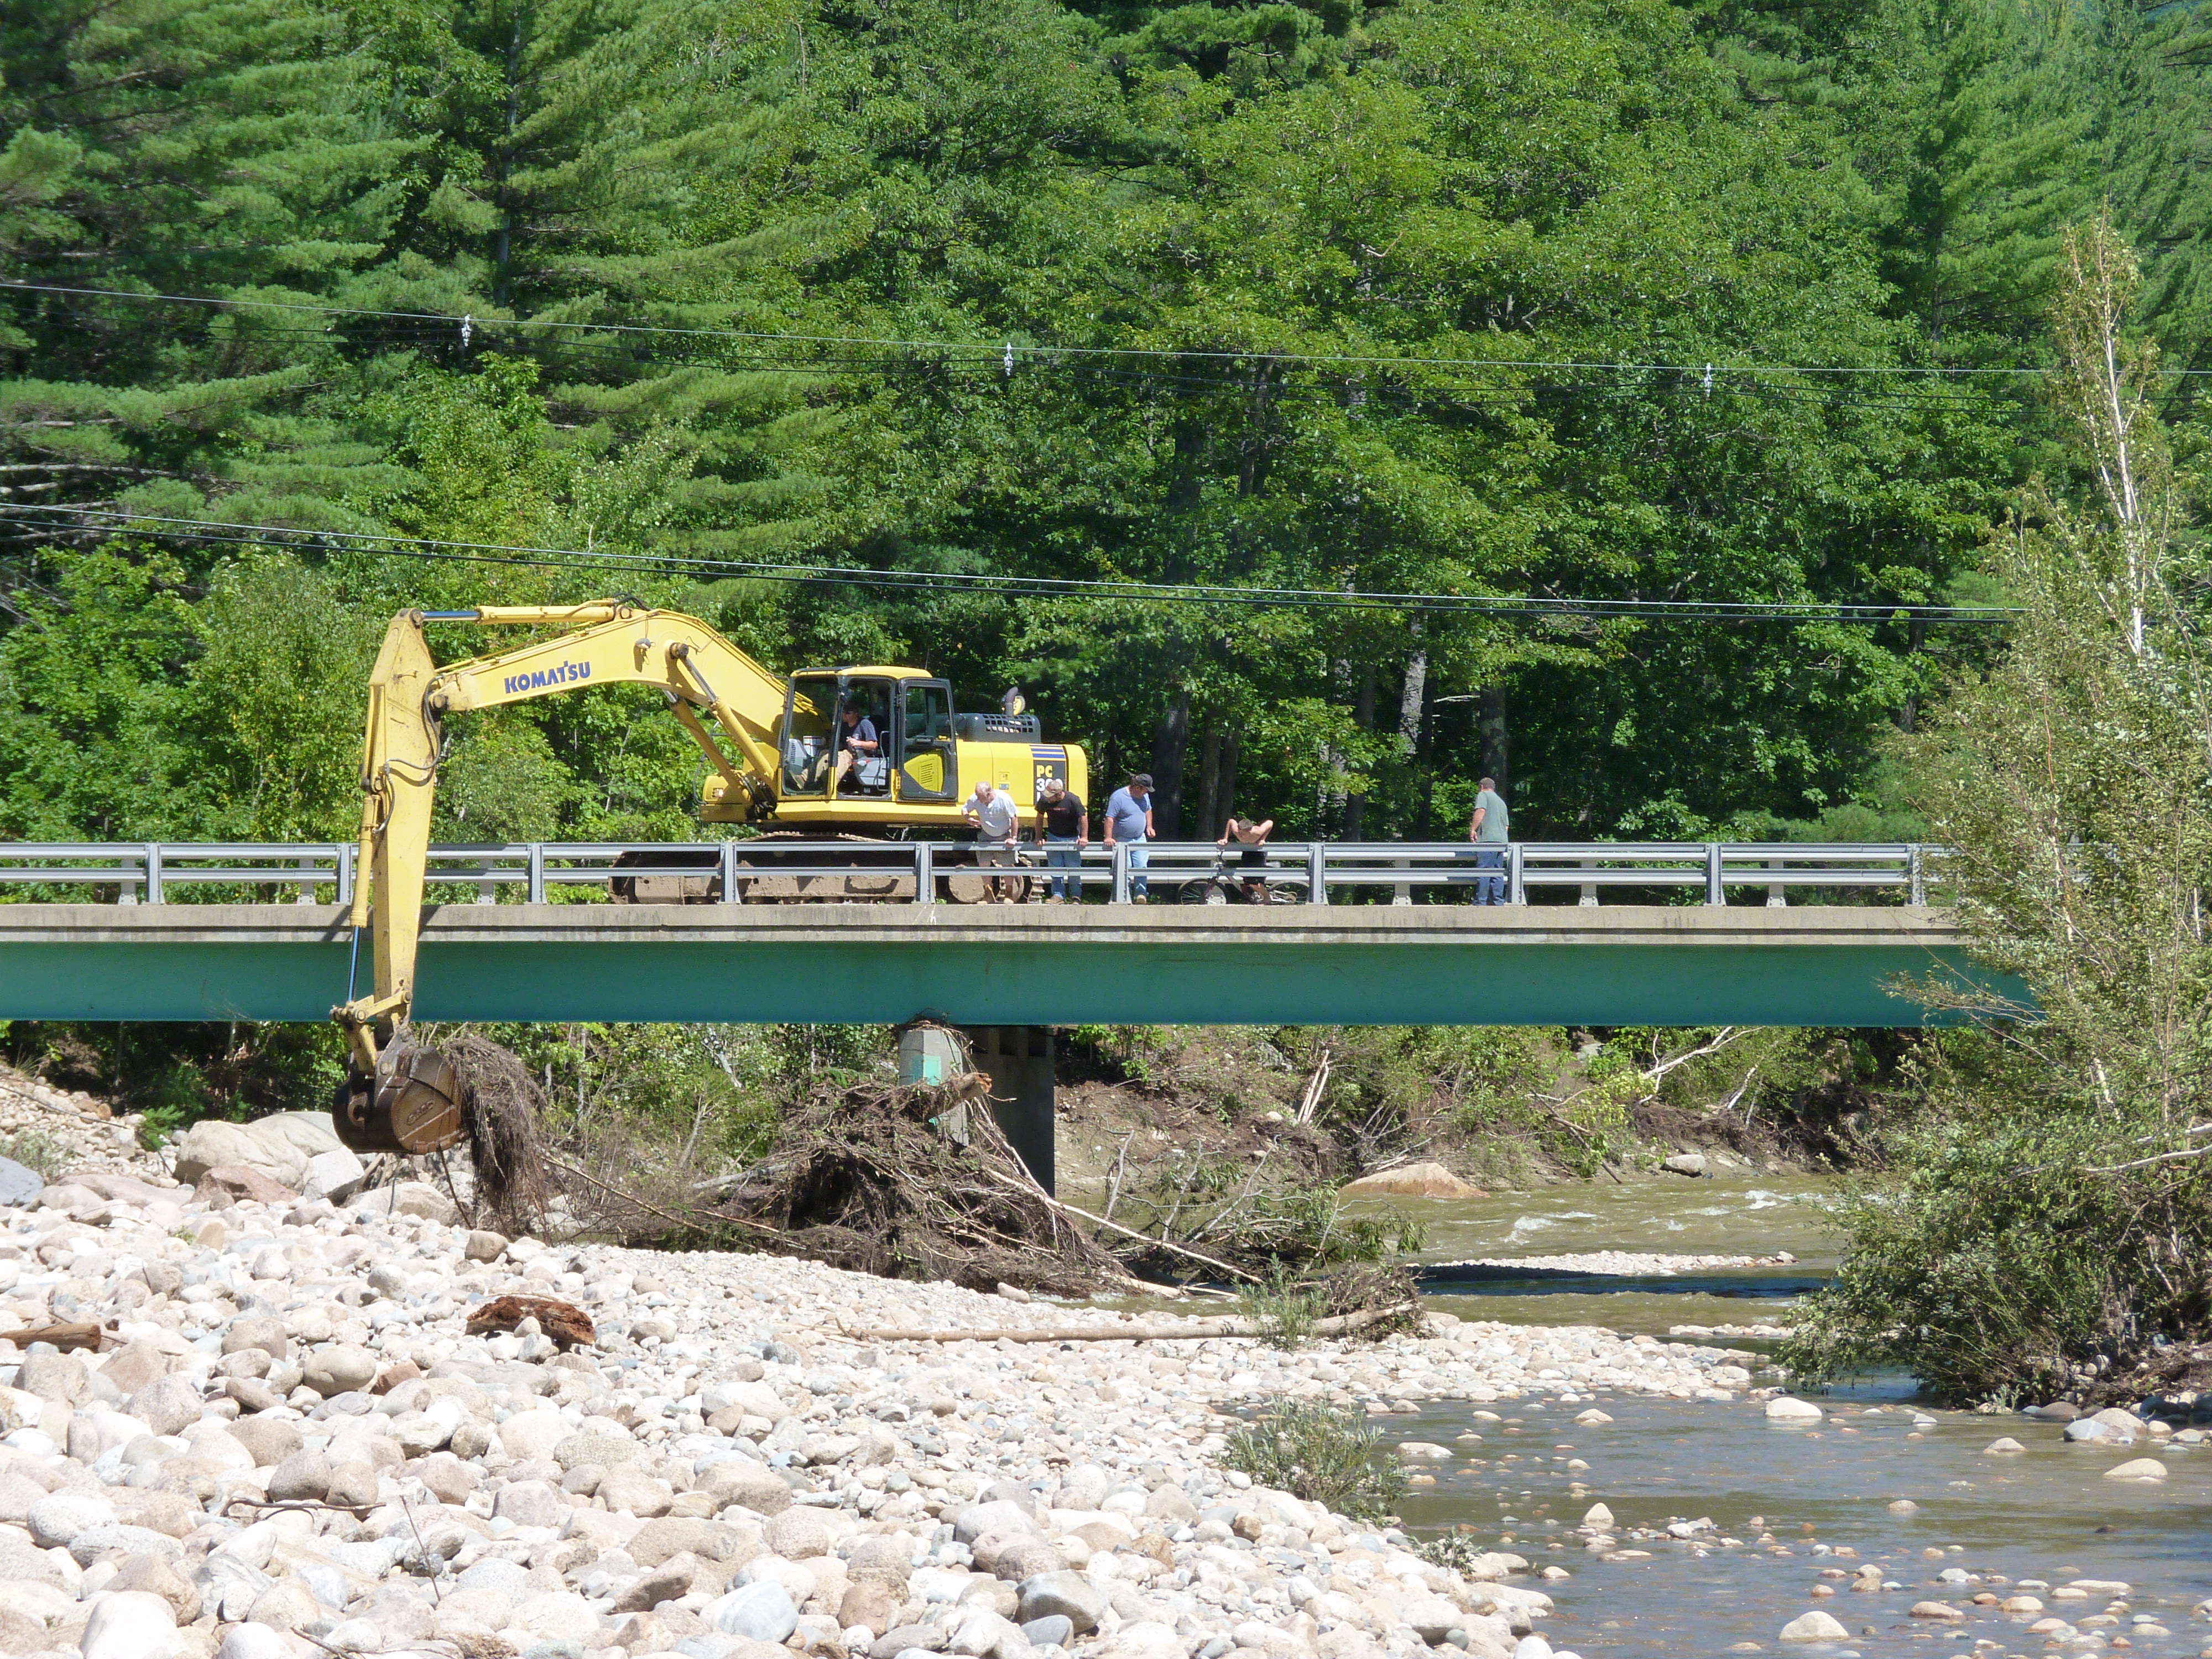 exacavator removing debris from a bridge after tropical storm irene